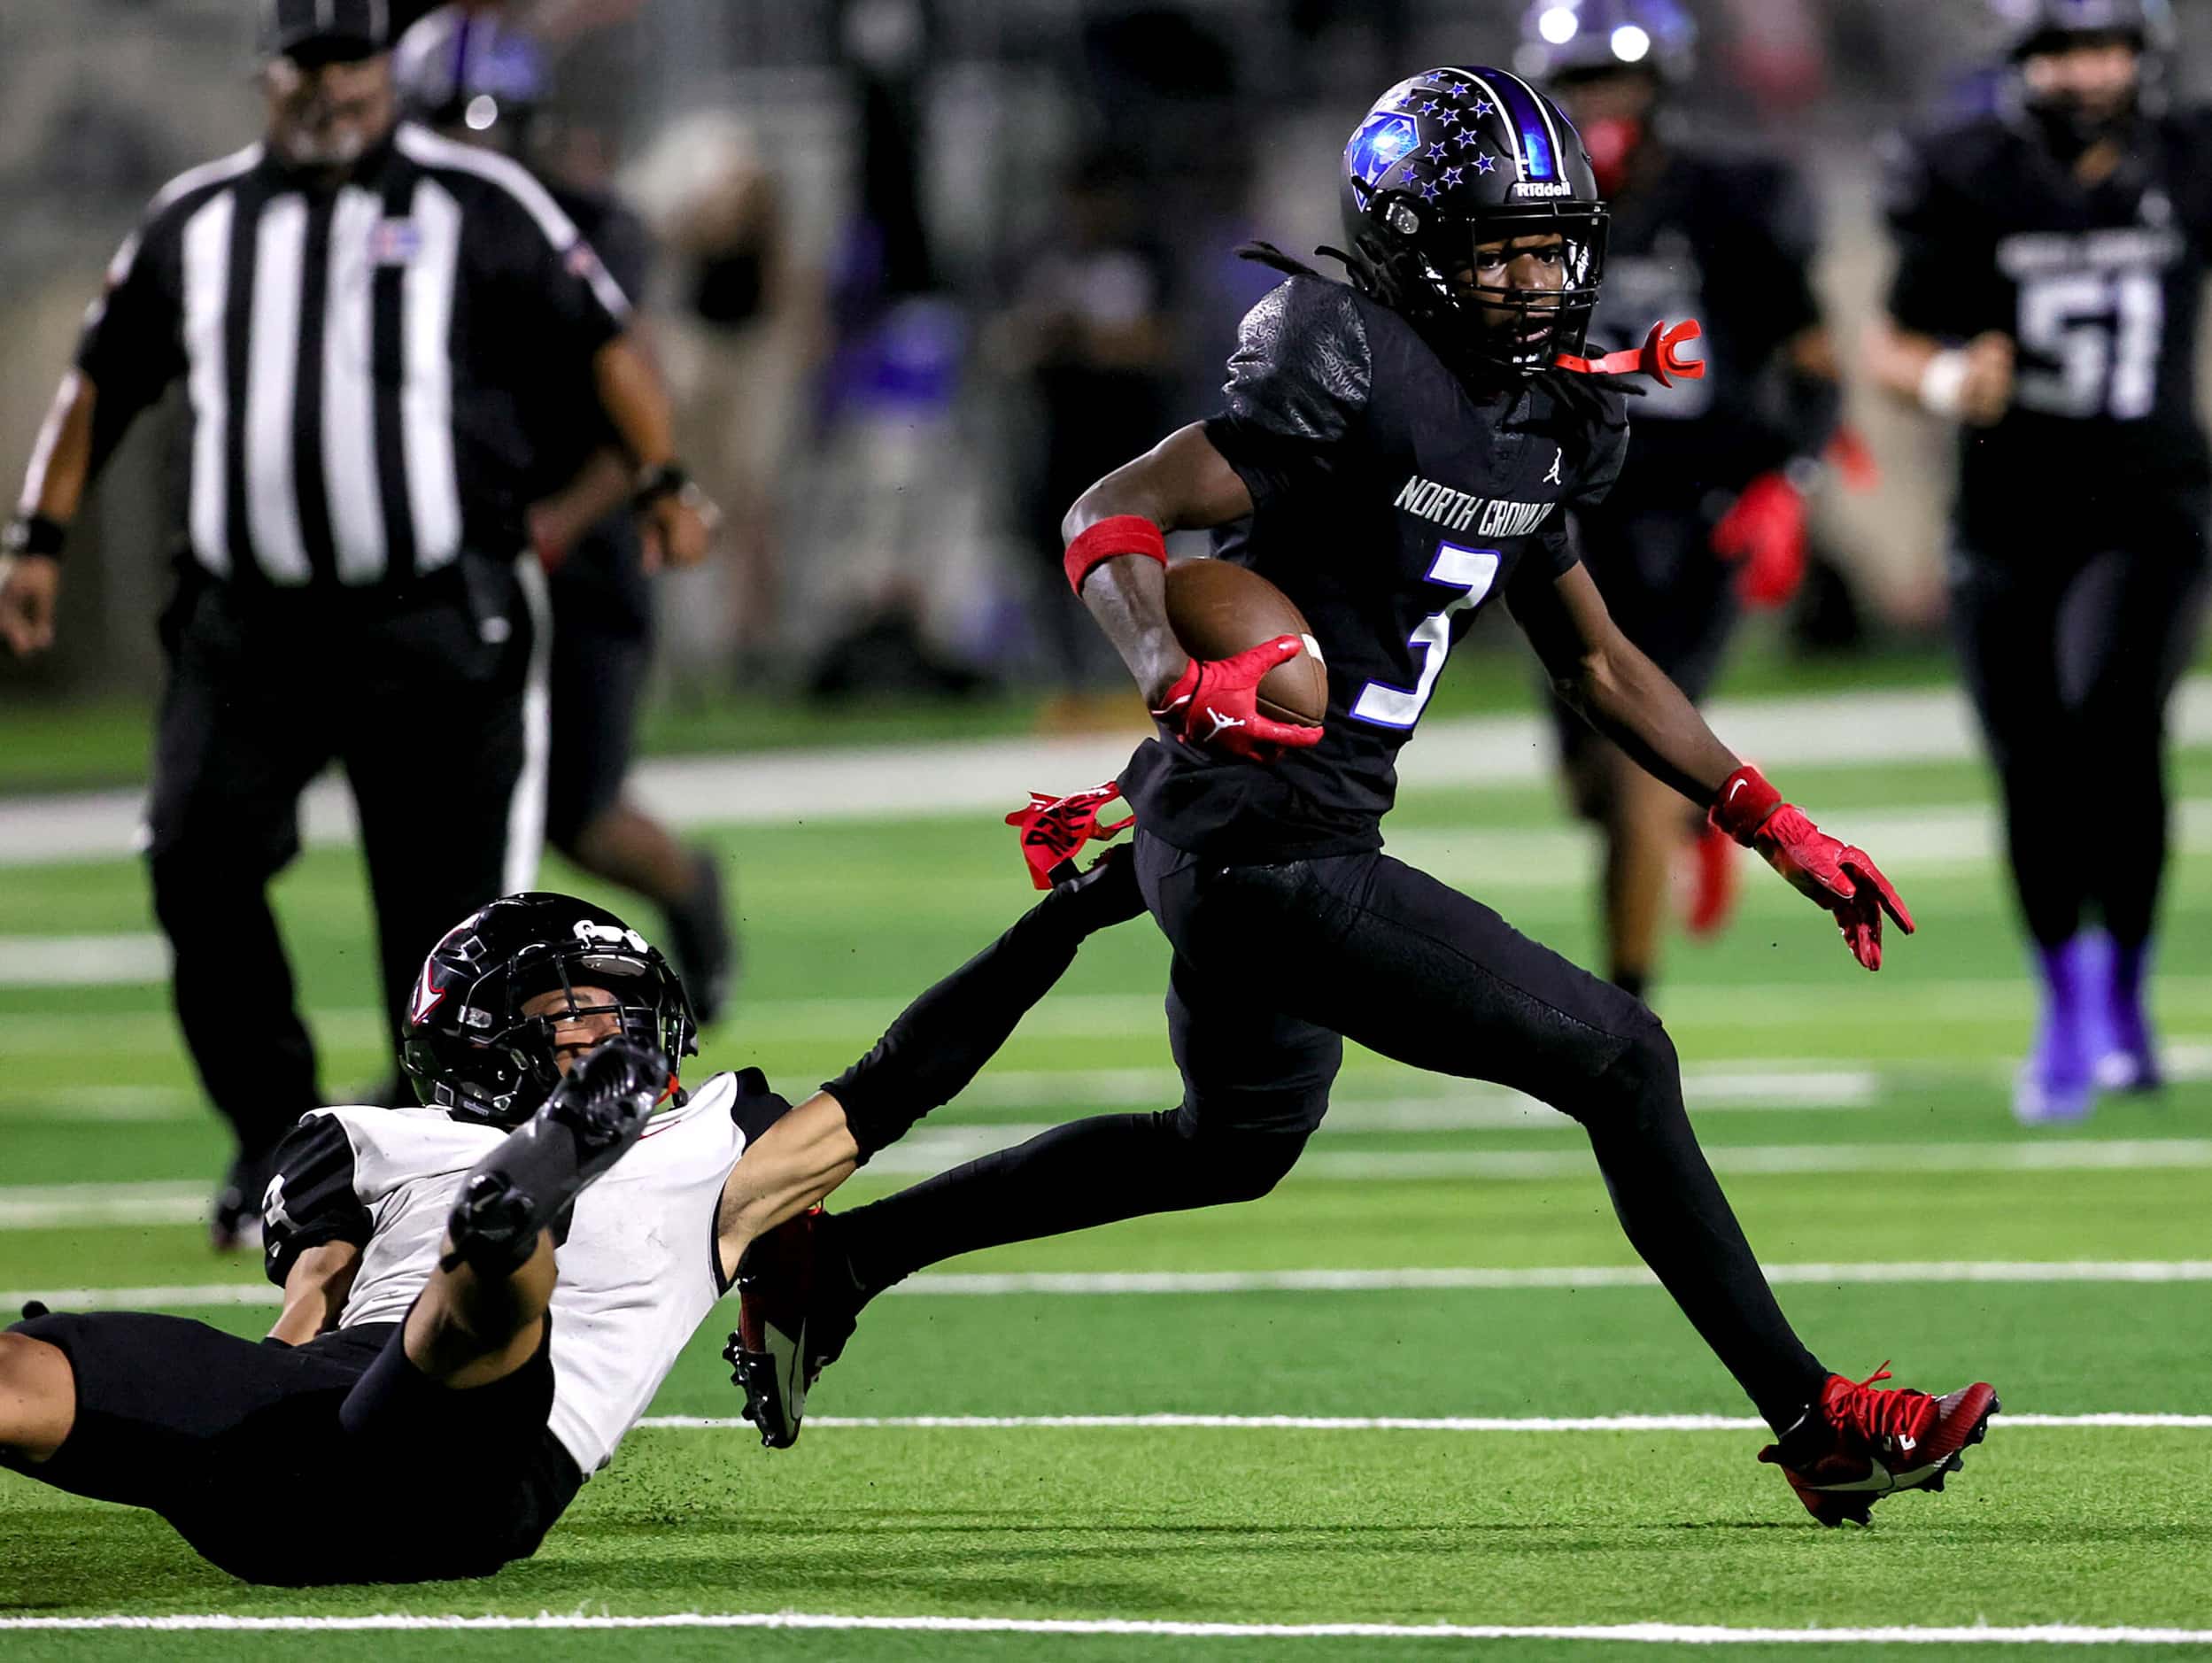 North Crowley wide receiver Dekoryian West-Davis (3) gets past Euless Trinity defensive back...